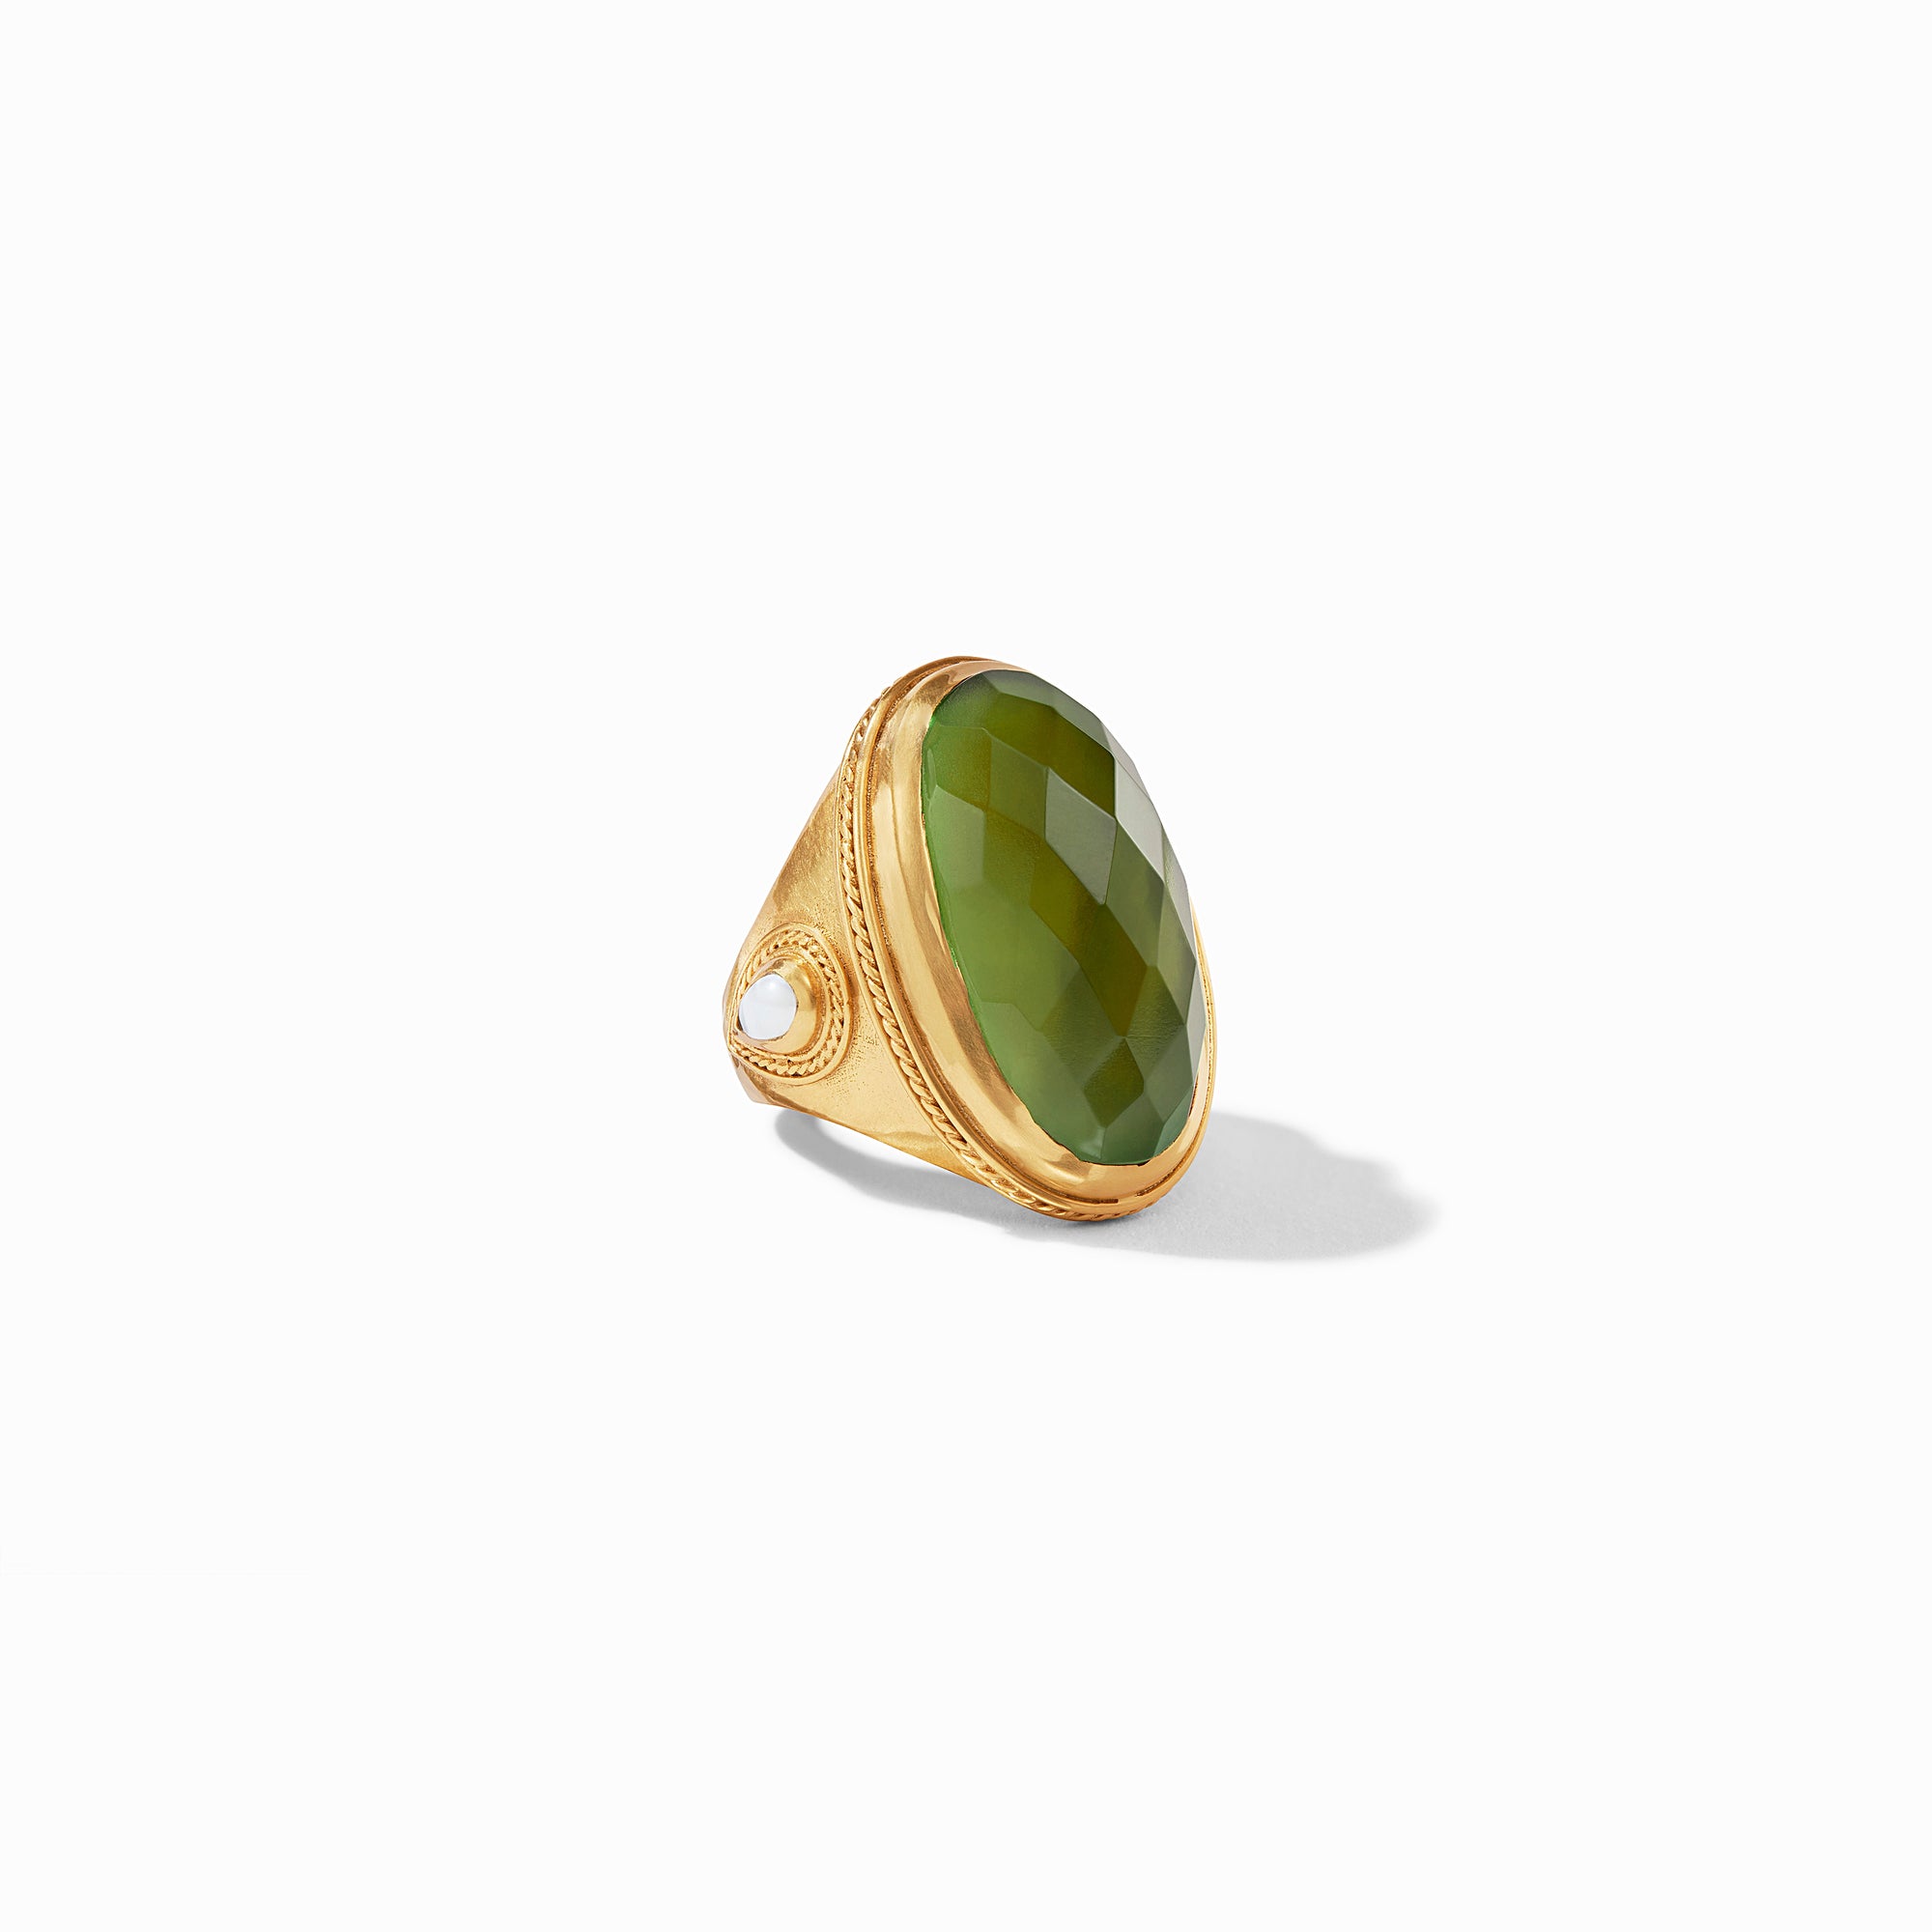 Julie Vos - Cassis Statement Ring, Iridescent Jade Green / 8, Iridescent Jade Green, jade green, fall 2021, holiday gift guide, holiday lombard fifth, spring shelby back, occasion jewels